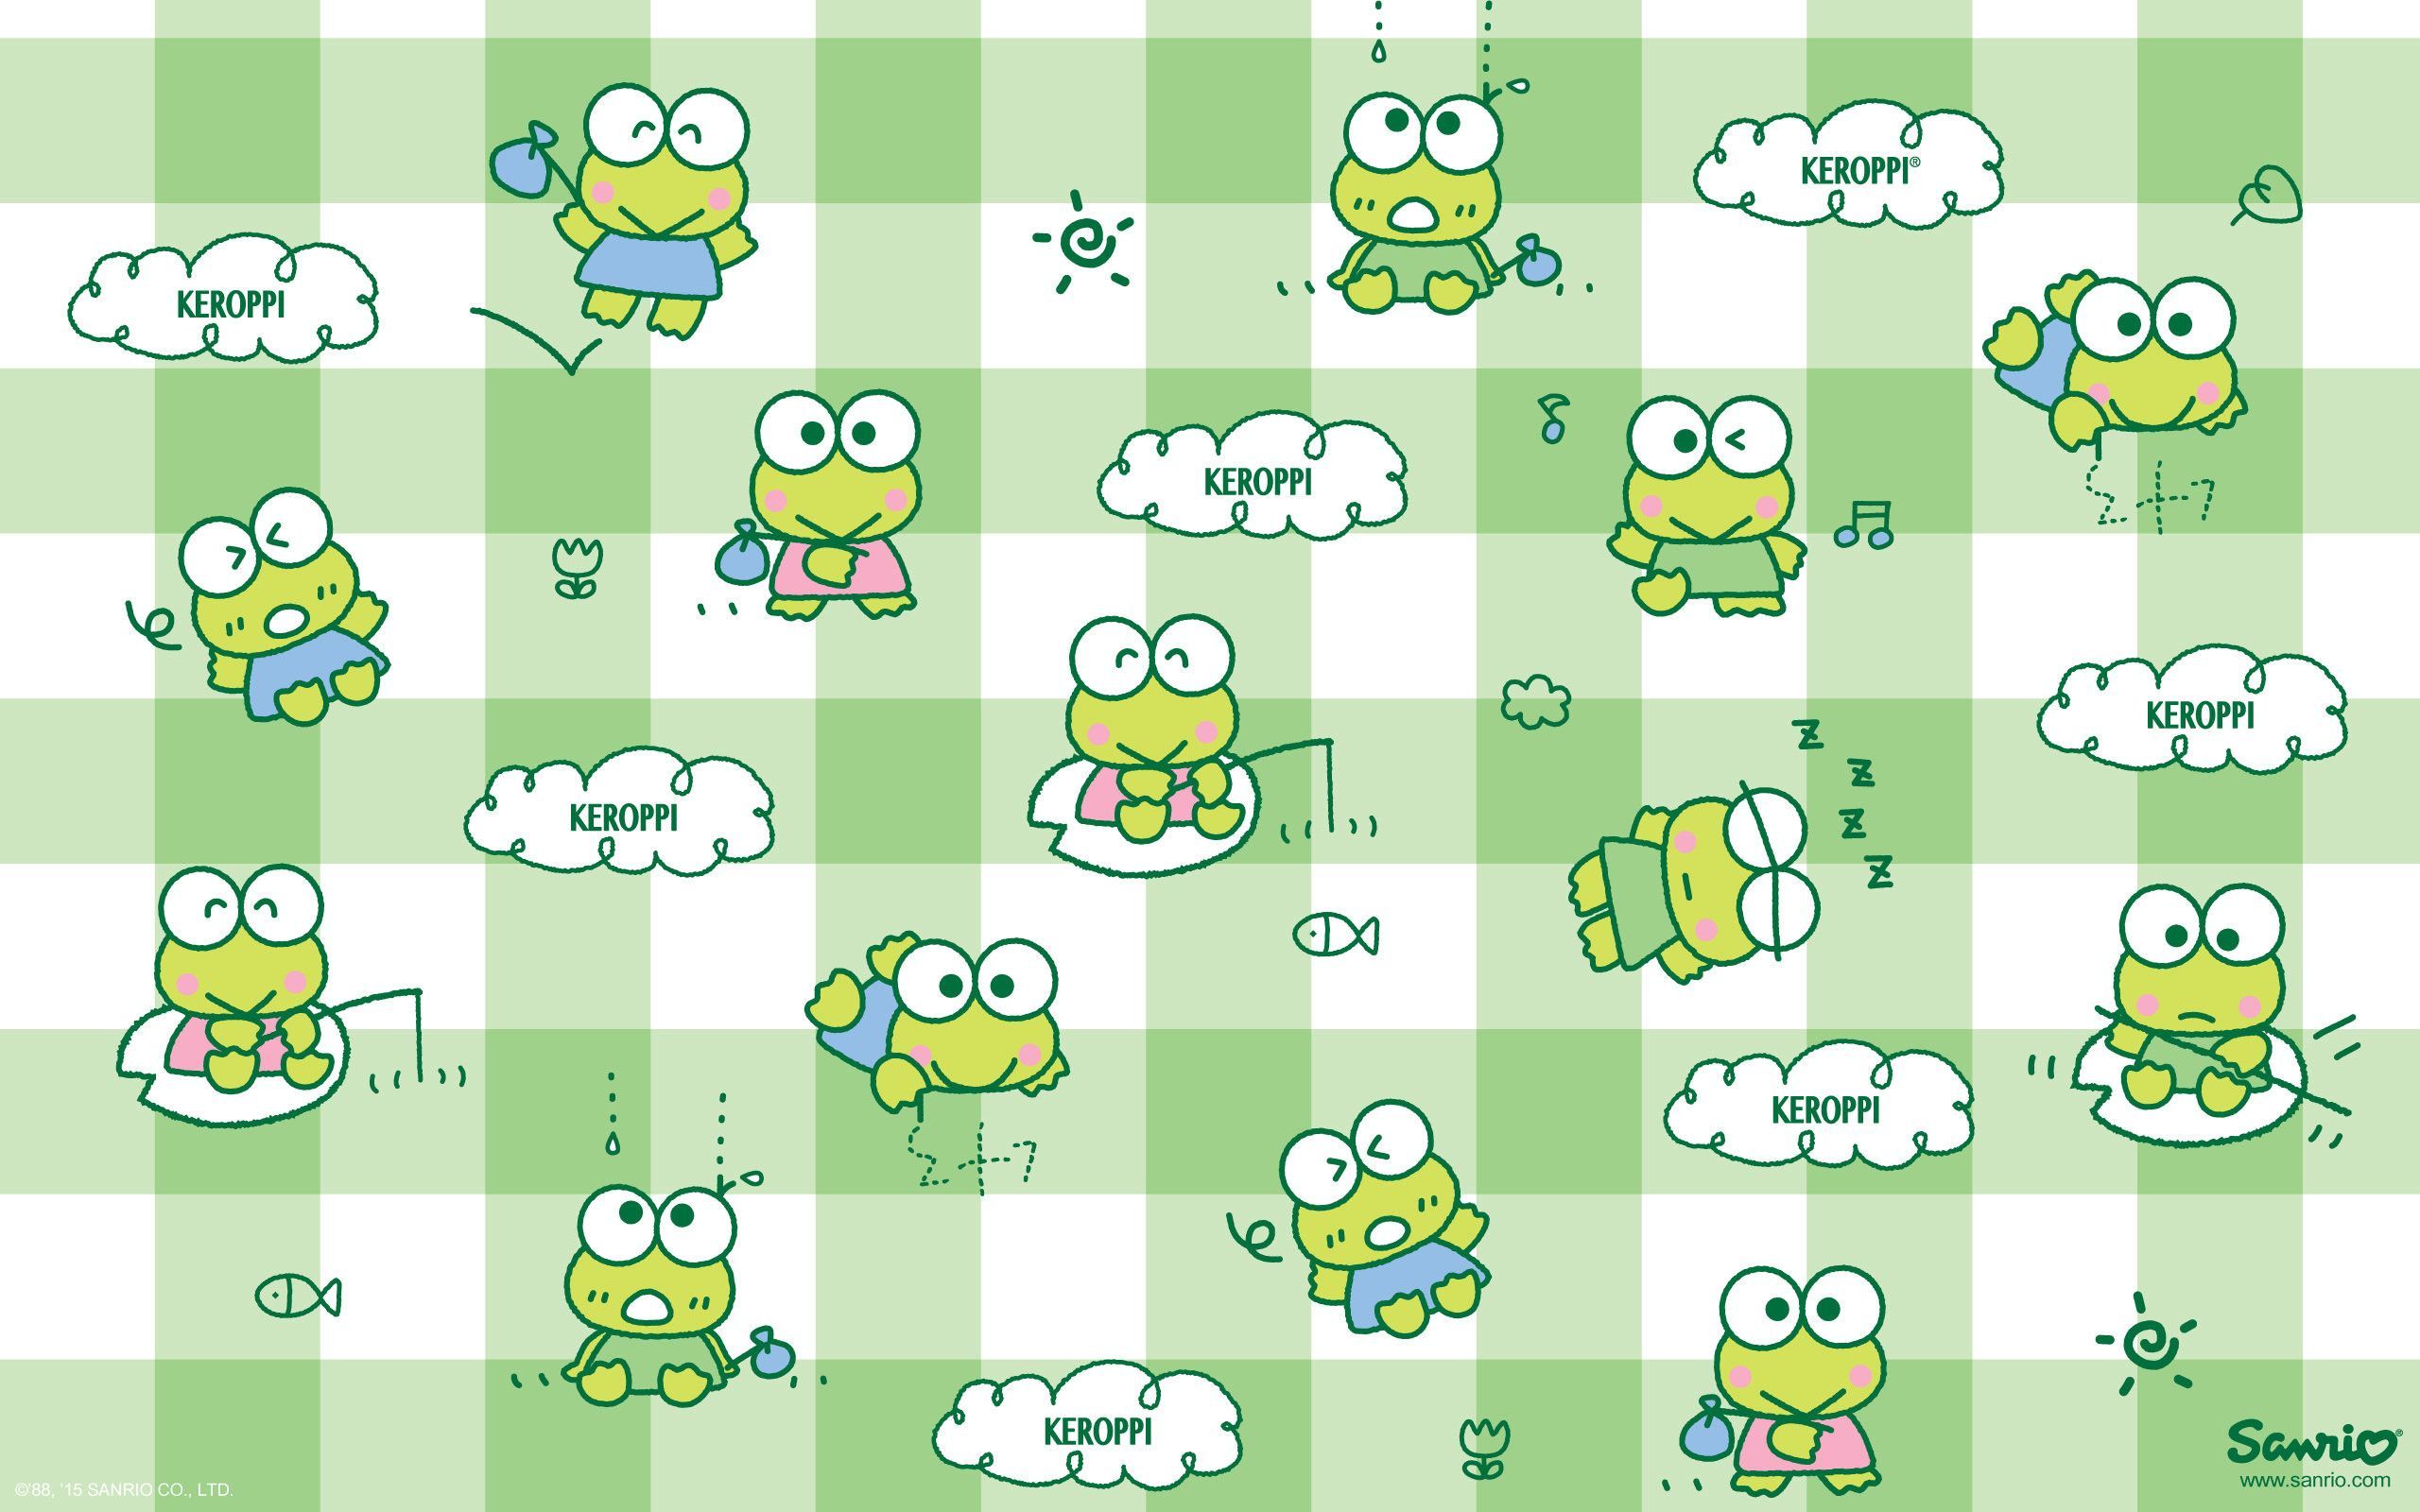 A pattern of green and white frogs - Sanrio, Keroppi